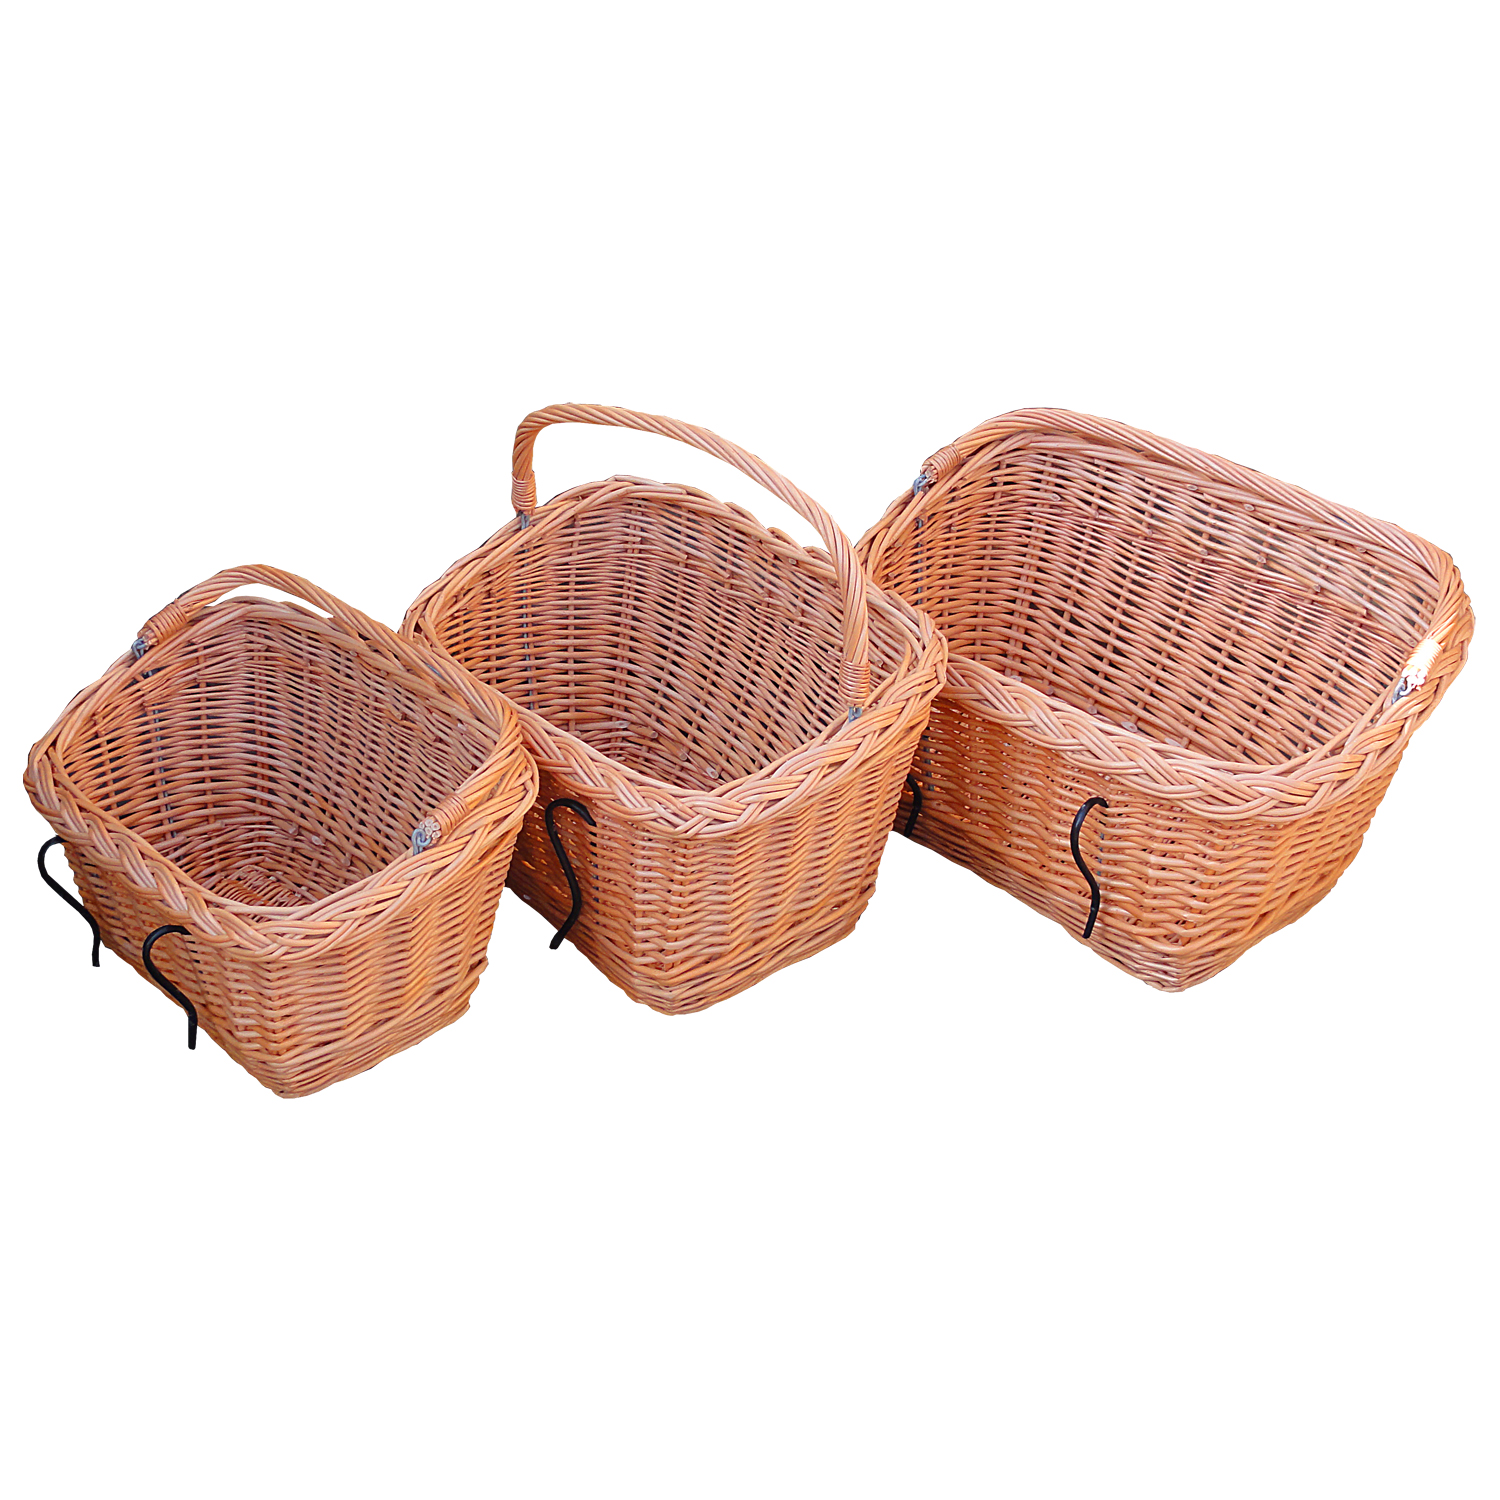 Wicker basket for bicycles